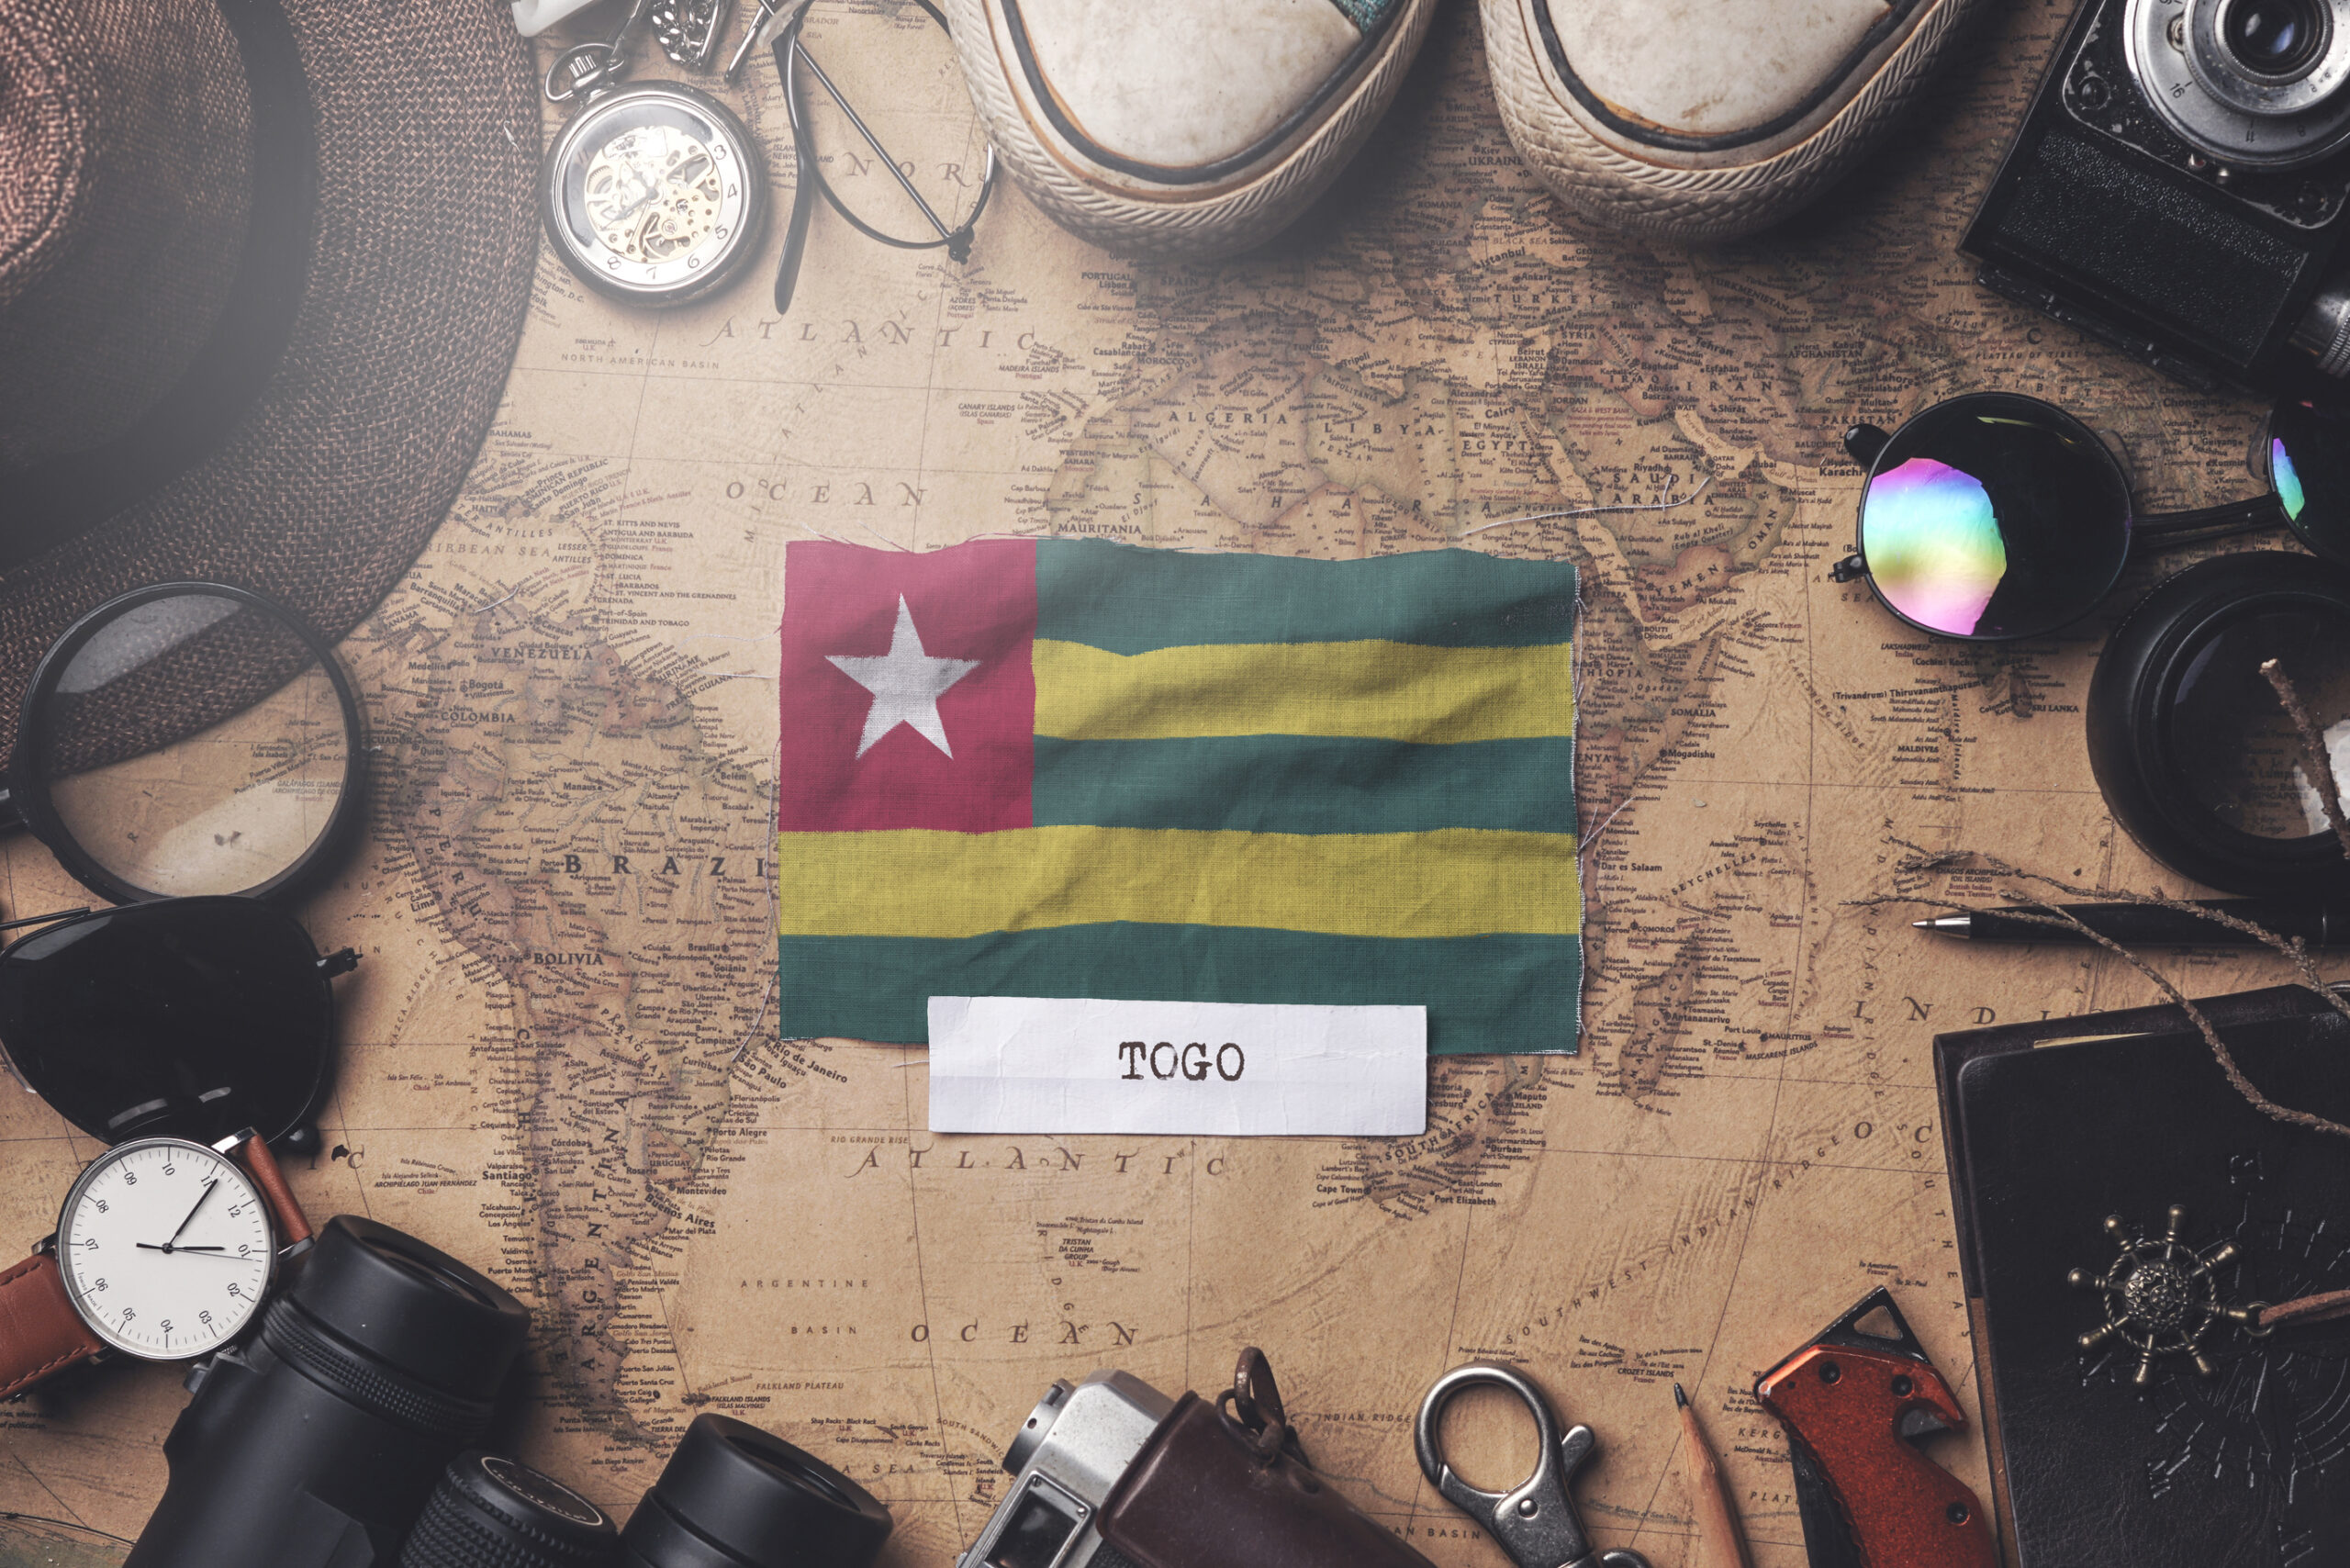 Togo warns of fines up to €130m for minor maritime infringements